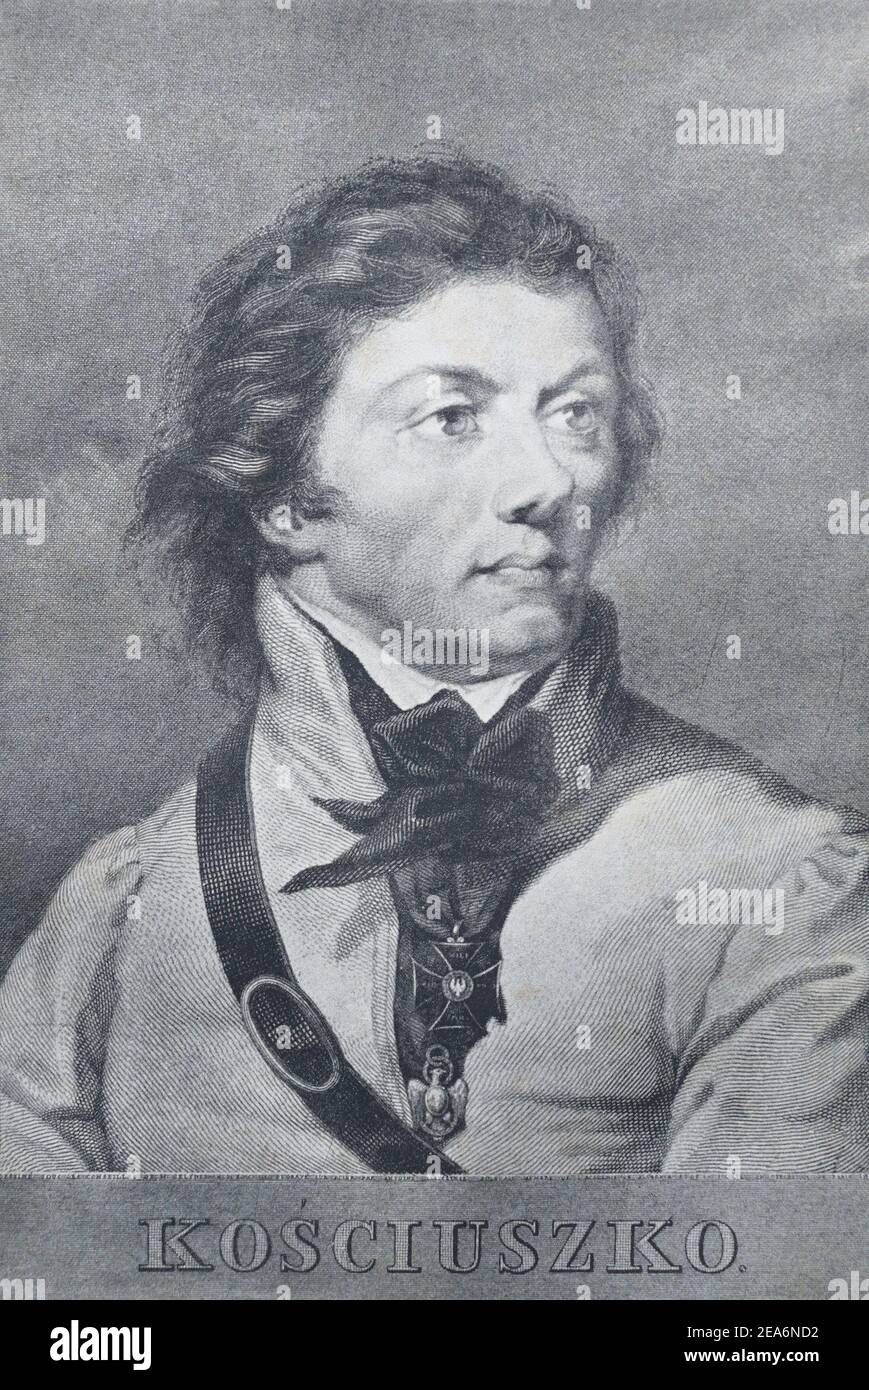 Andrzej Tadeusz Bonawentura Kościuszko (Tadeusz Kosciuszko). Engraving of 1829. Andrzej Tadeusz Bonawentura Kościuszko (English: Andrew Thaddeus Bonaventure Kosciuszko; 4 or 12 February 1746 – 15 October 1817) was a Polish-Lithuanian military engineer, statesman, and military leader who became a national hero in Poland, Lithuania, Belarus, and the United States. He fought in the Polish–Lithuanian Commonwealth's struggles against Russia and Prussia, and on the US side in the American Revolutionary War. Stock Photo